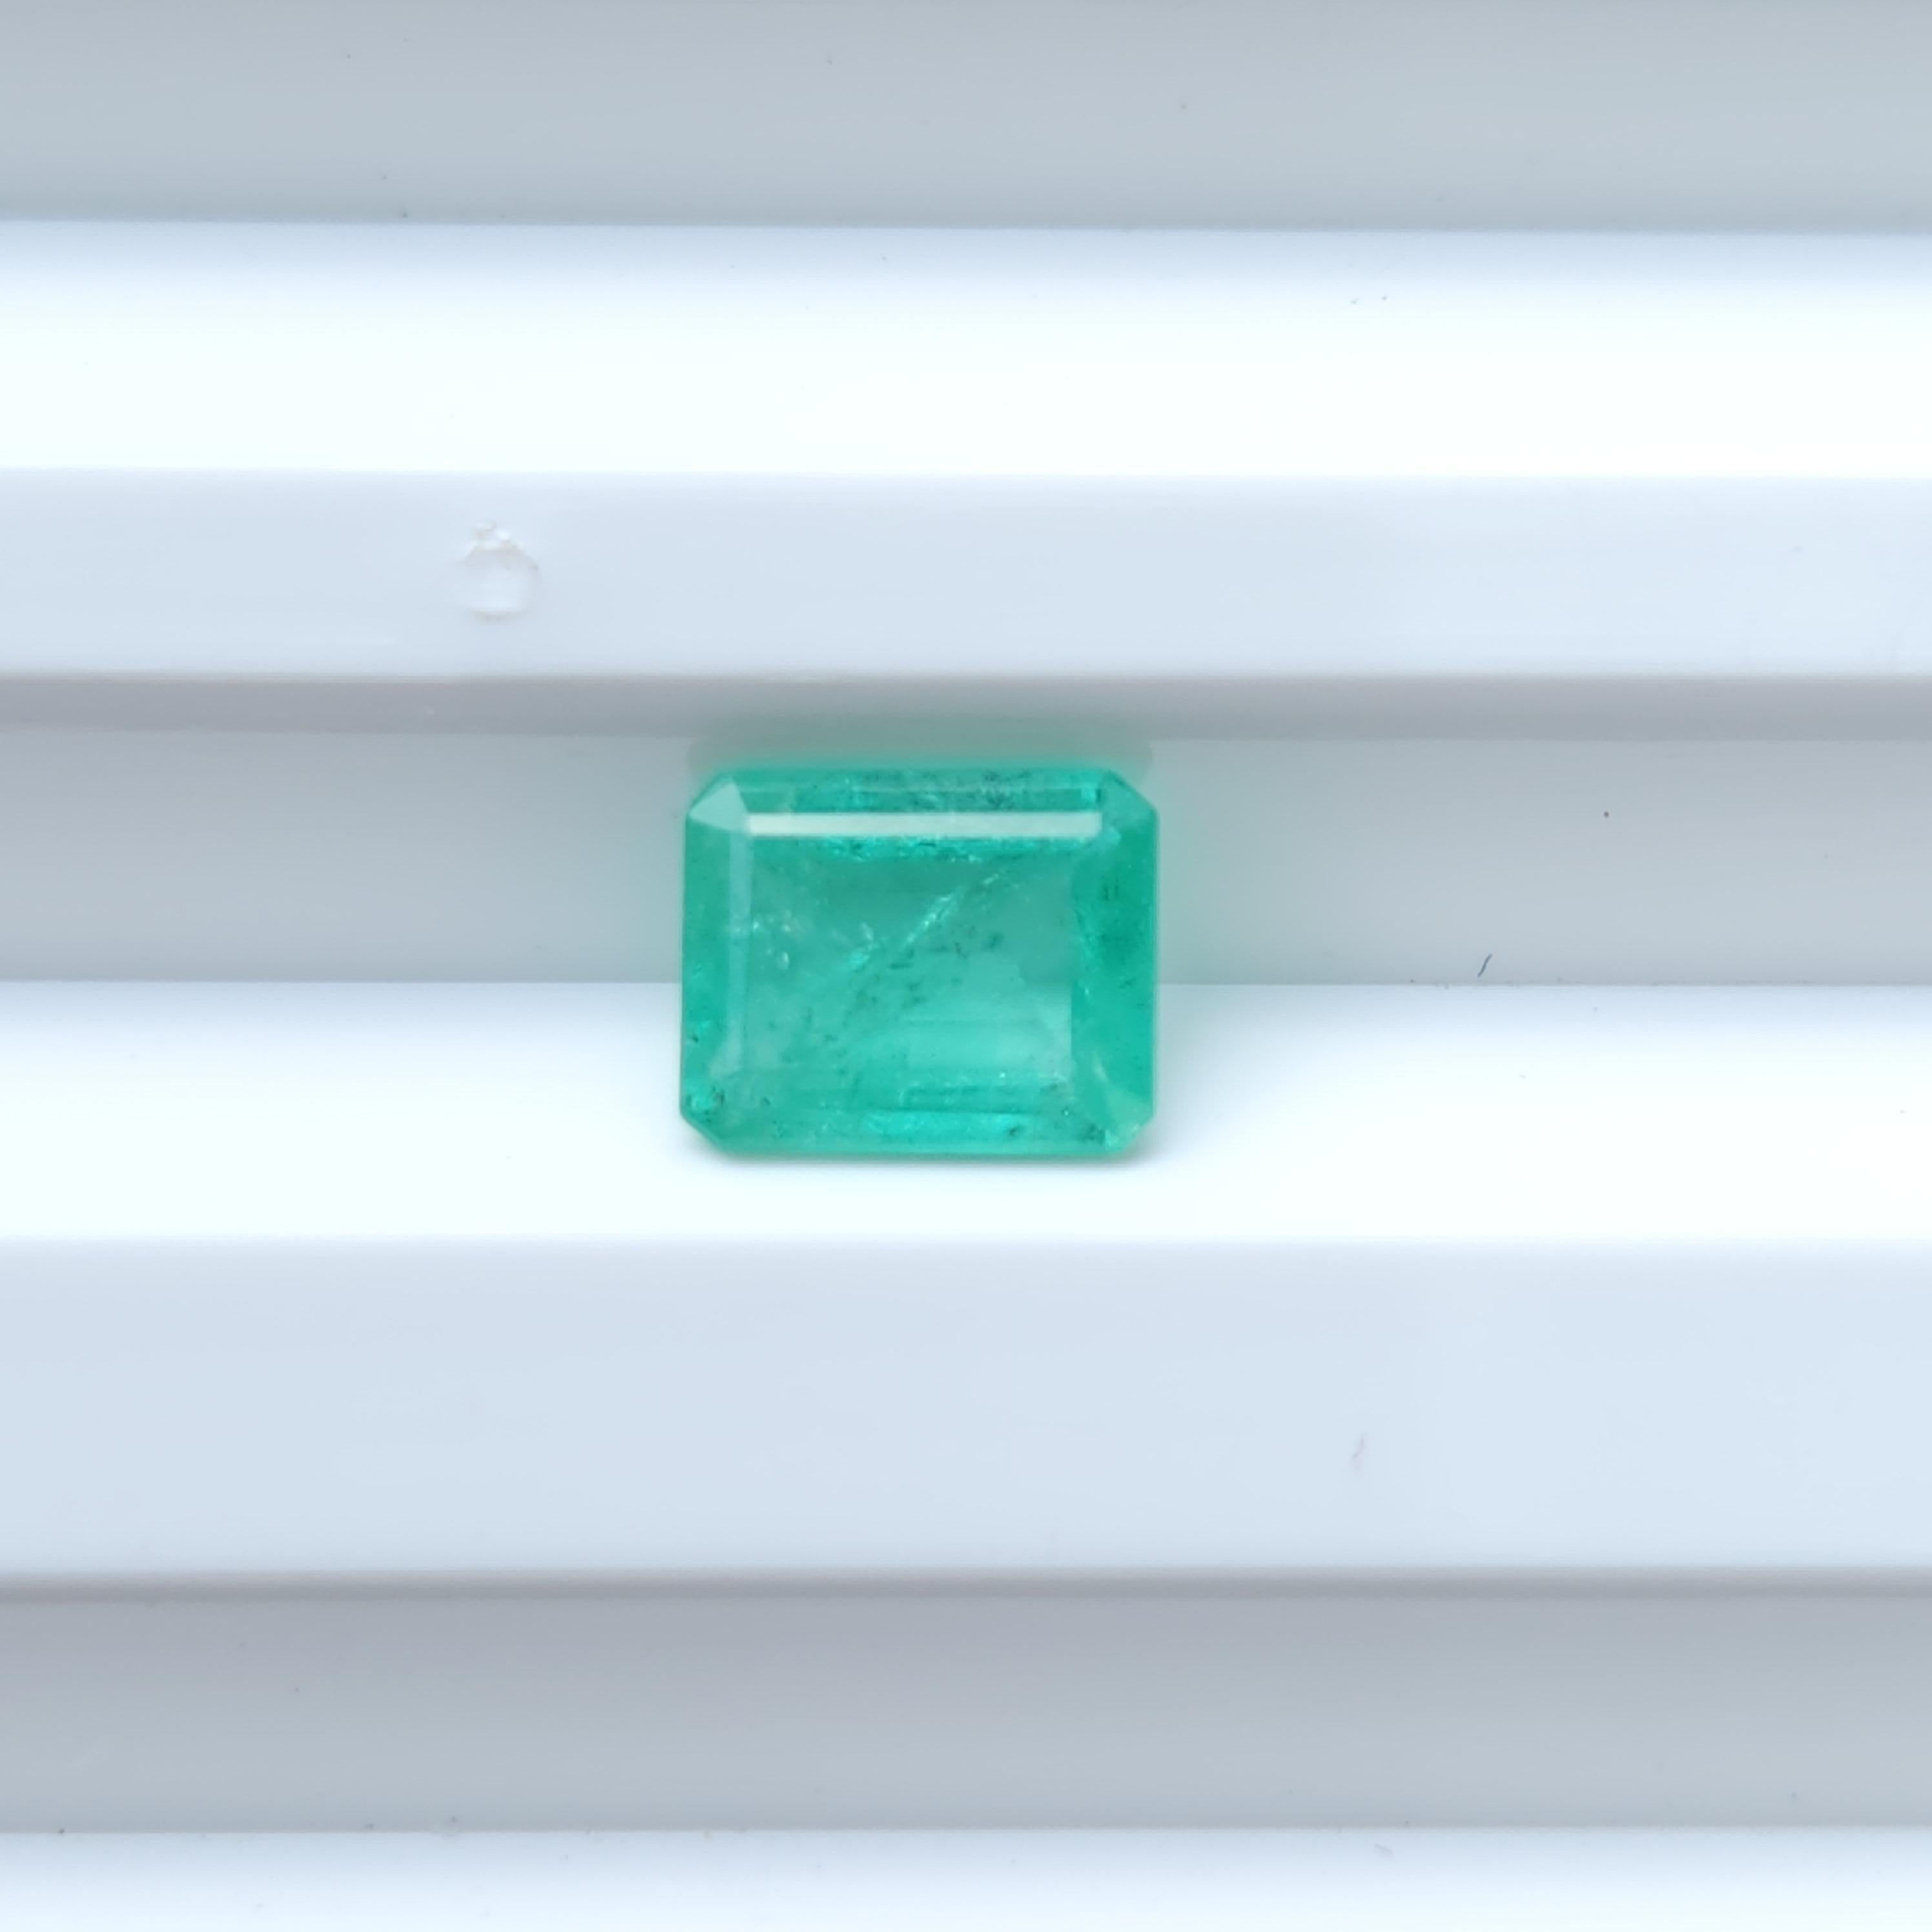 Dazzling 0.905ct Loose Radiant Shape Colombian Emerald Gemstone

Product Description:

Introducing our mesmerizing 0.905ct loose Radiant Shape Colombian Emerald gemstone—a true embodiment of Colombia's lush gemological legacy and nature's intricate